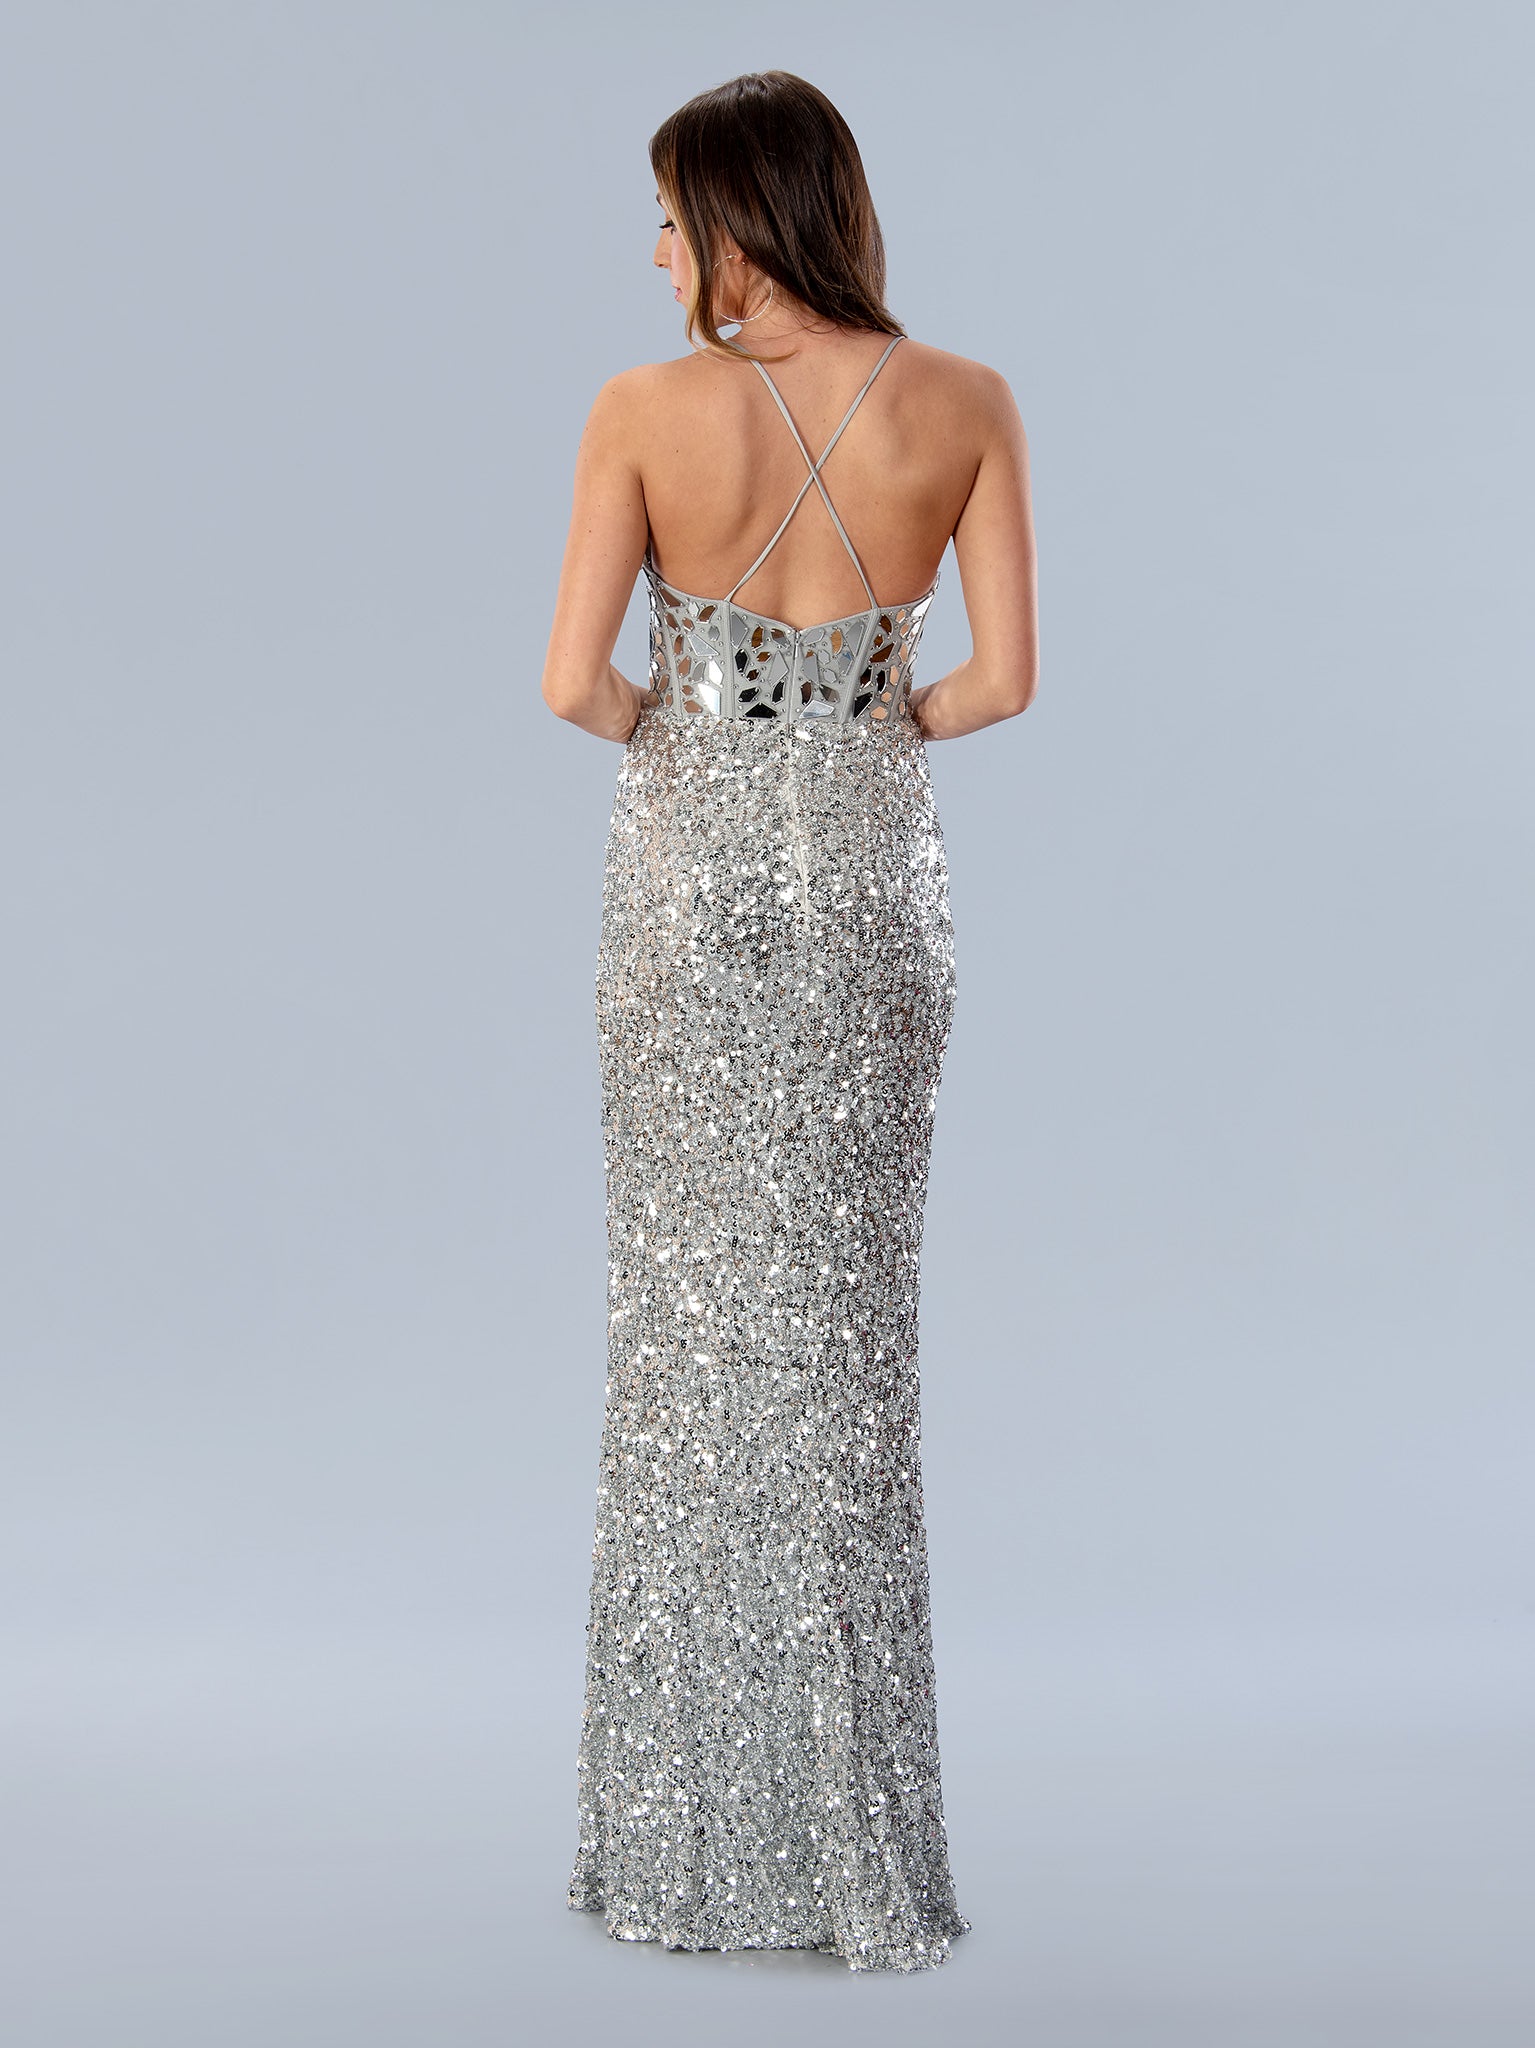 Look breathtaking in Stella Couture 24161. This floor-length dress features a V-neckline and a sparkling sequin-cut corset bodice. The long, A-line skirt features a high slit for a touch of allure. Perfect for formal prom events or special occasions.  Sizes: 0-24  Colors: BLACK, RED, SILVER